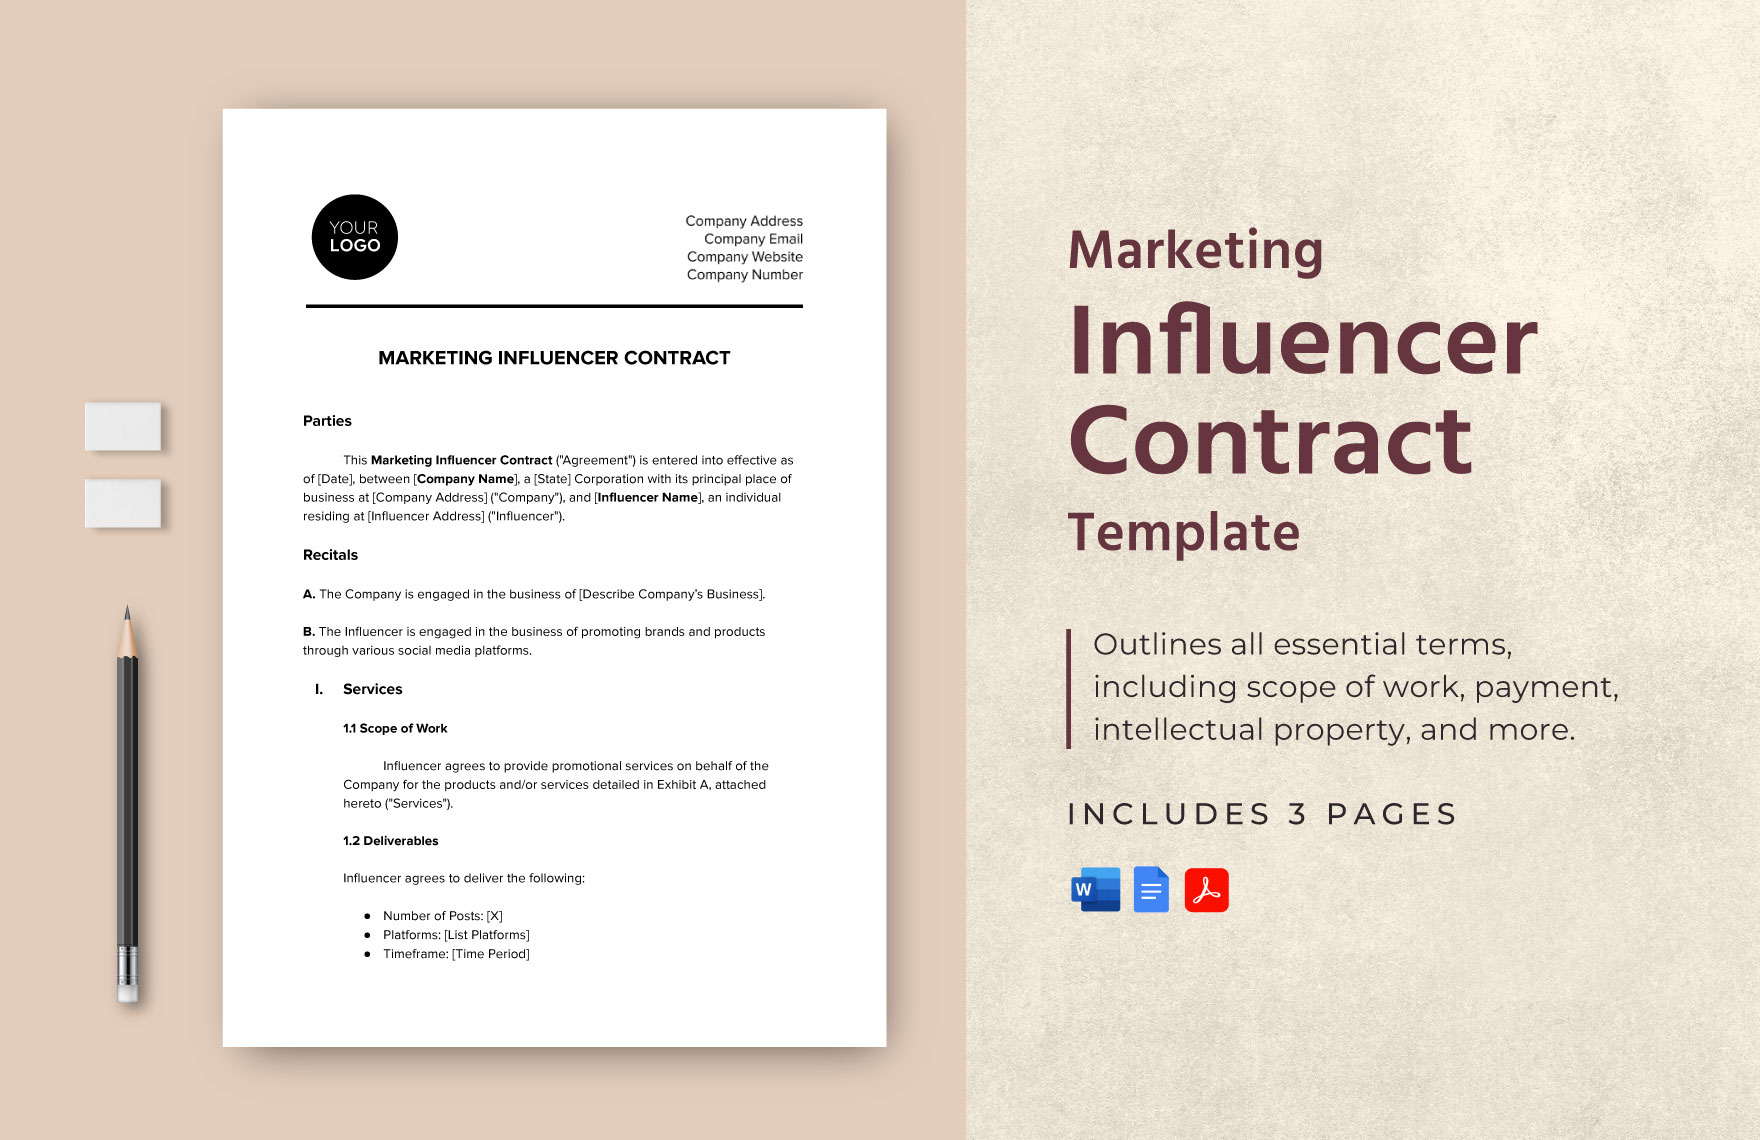 Marketing Influencer Contract Template in Word, Google Docs, PDF